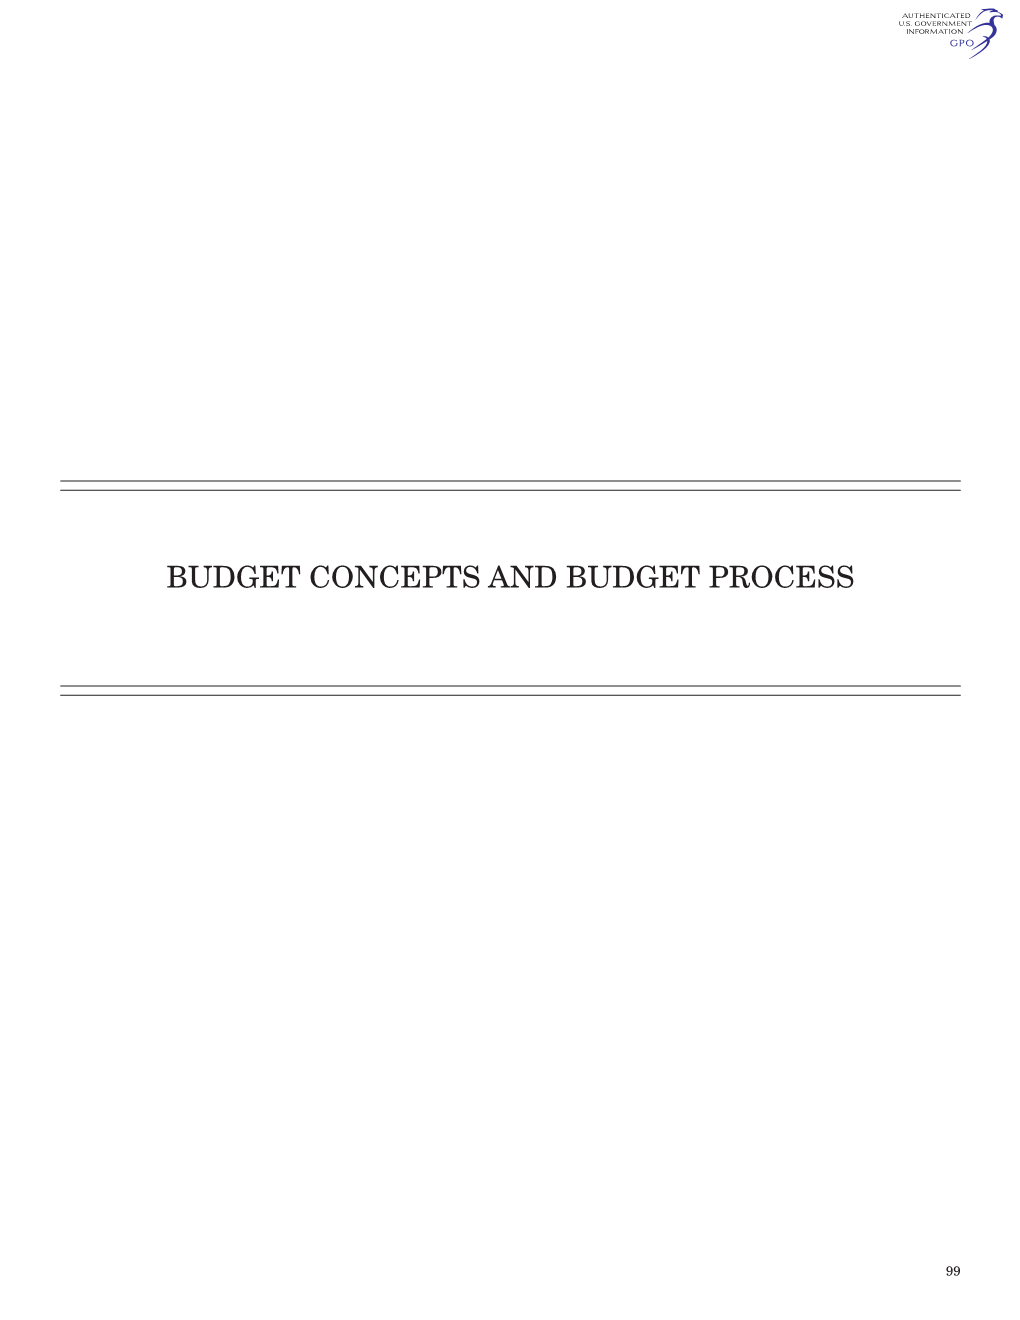 Budget Concepts and Budget Process